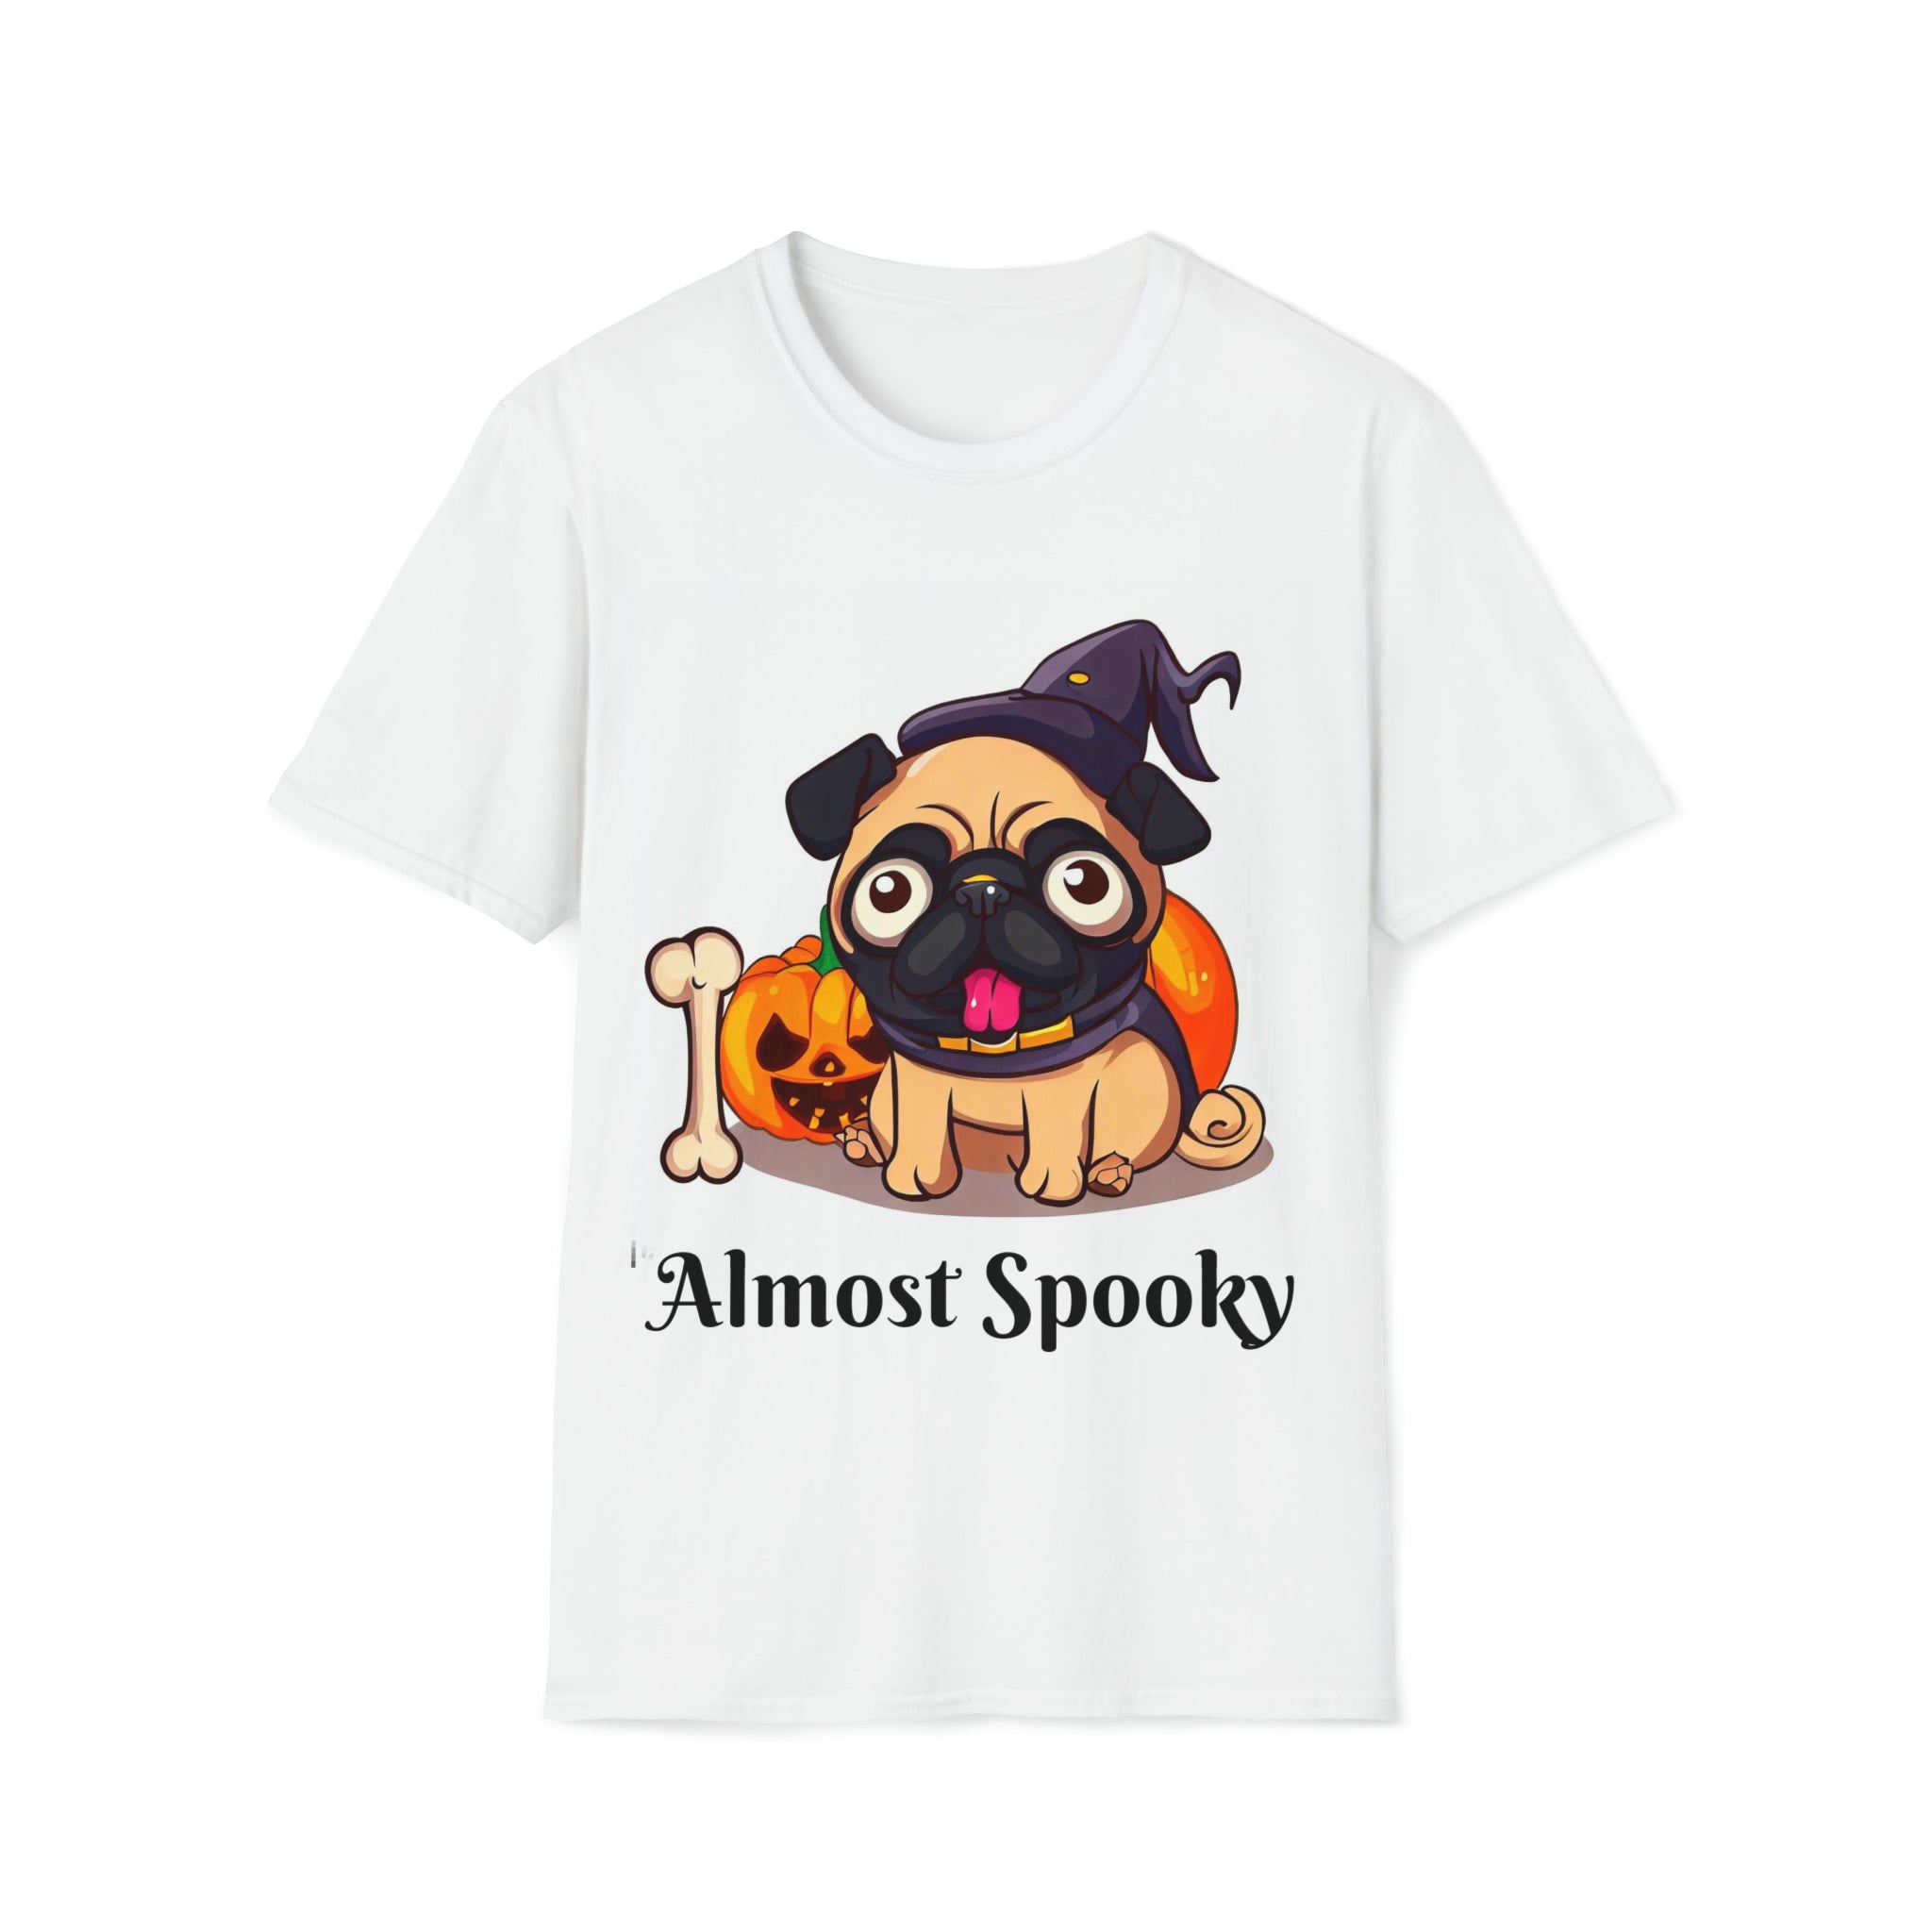 Unisex Softstyle T-Shirt Almost Spooky to enjoy this Halloween